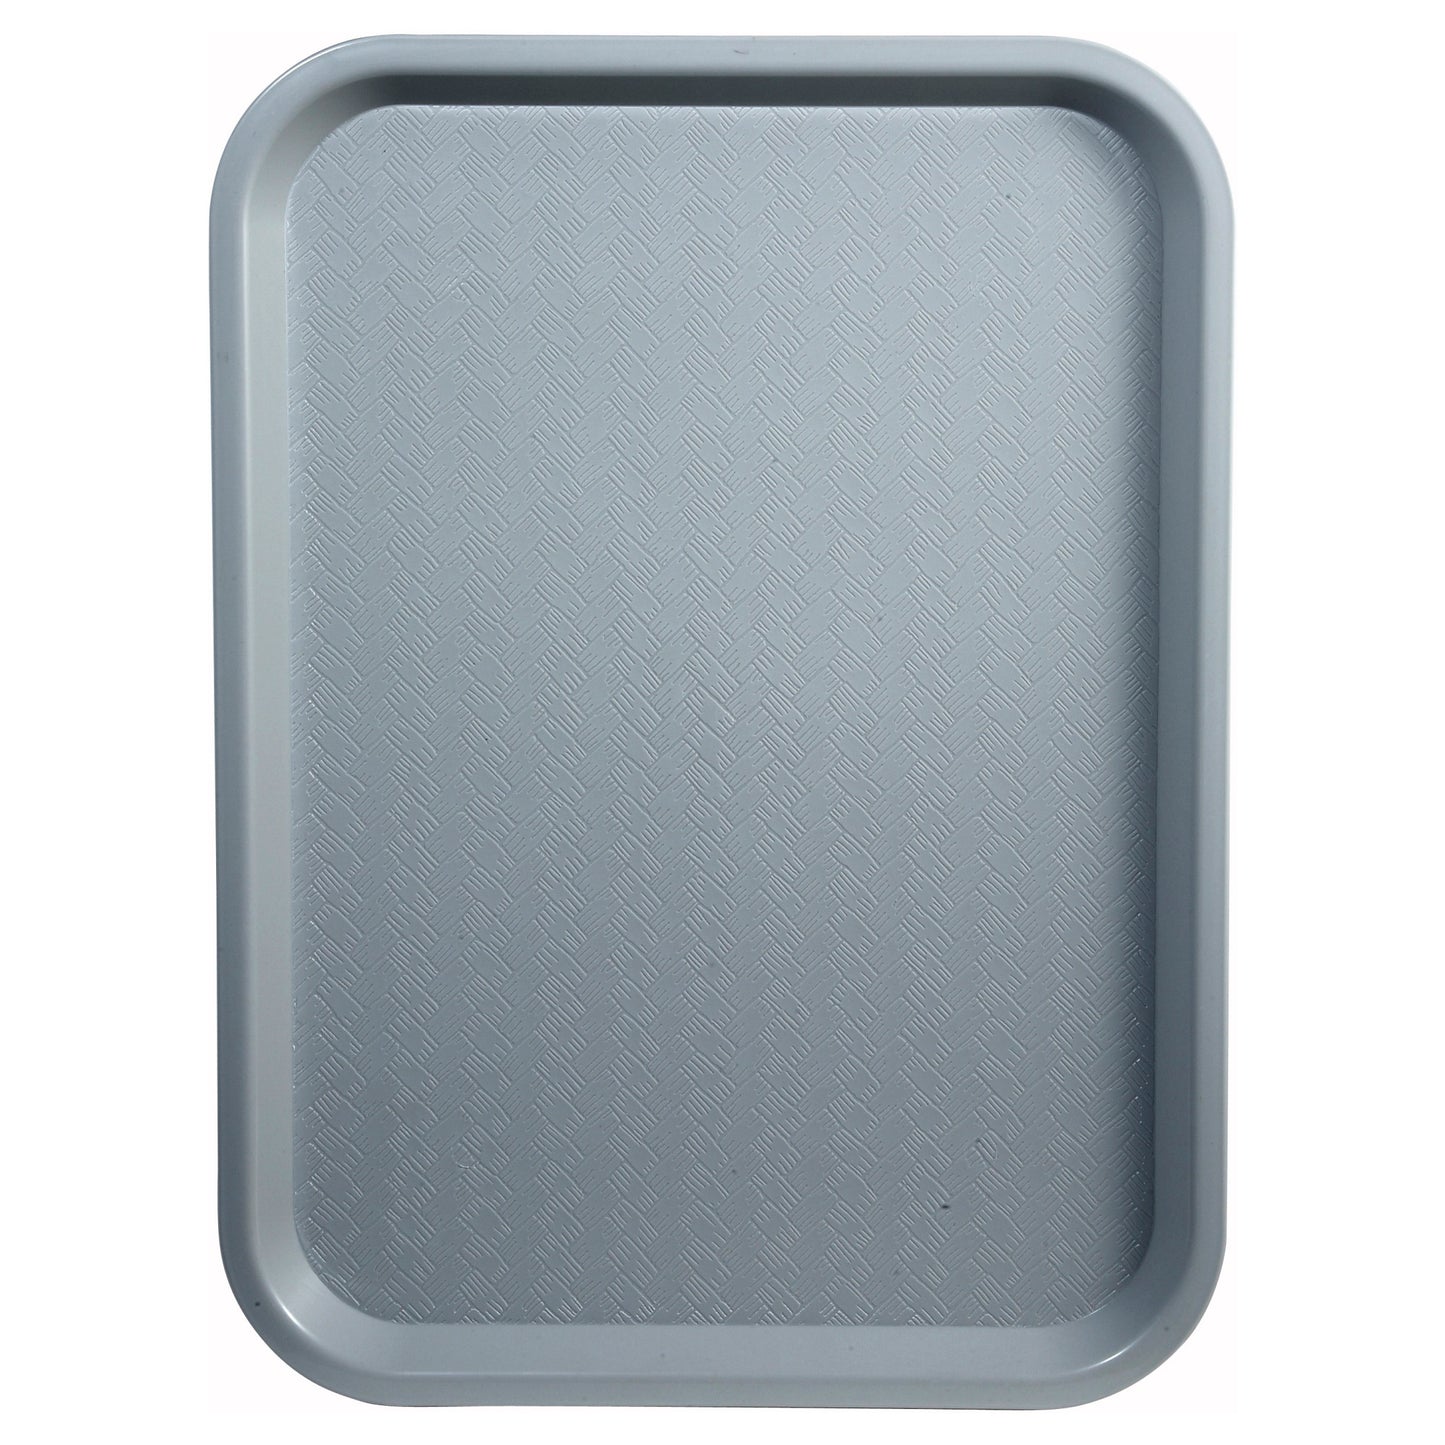 High Quality Plastic Cafeteria Tray - 12 x 16, Gray